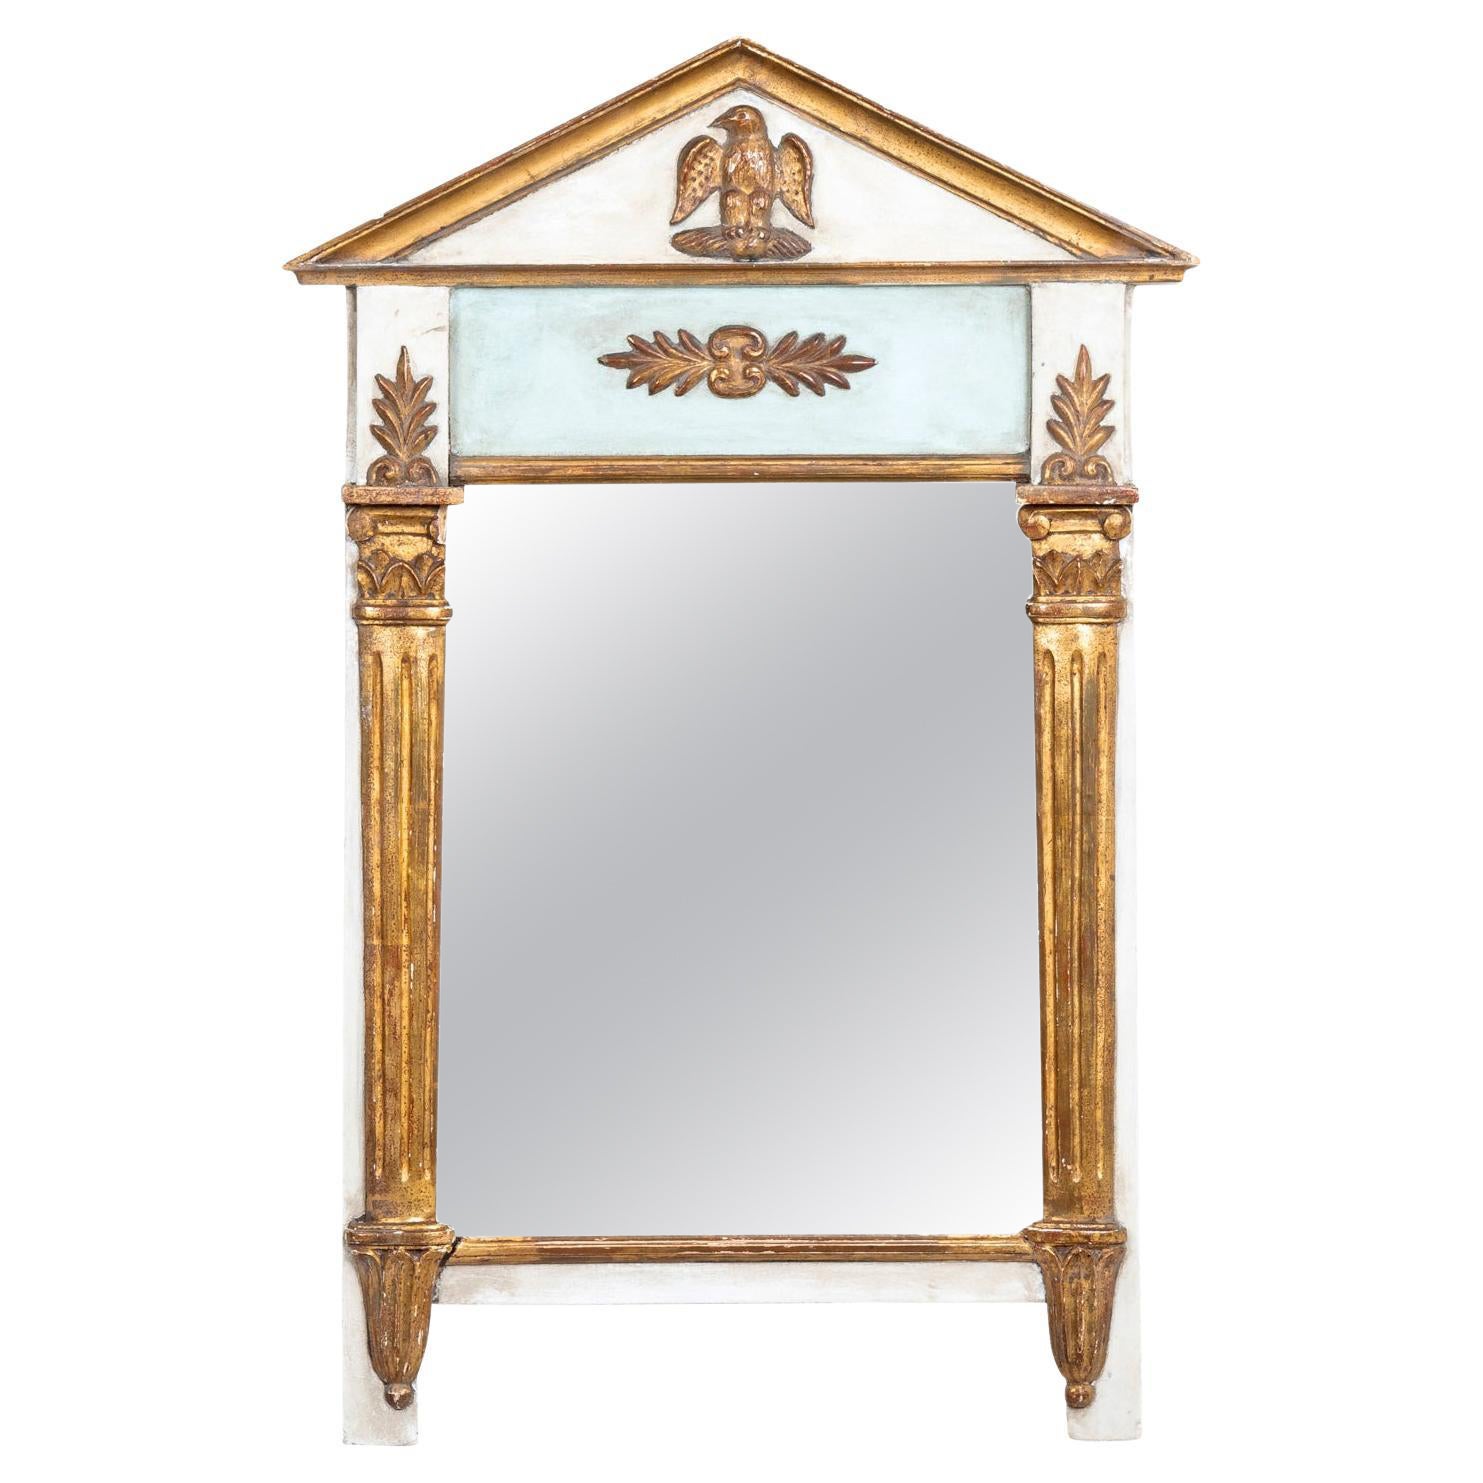 Gustavian-Style Blue, White, and Gold Mirror